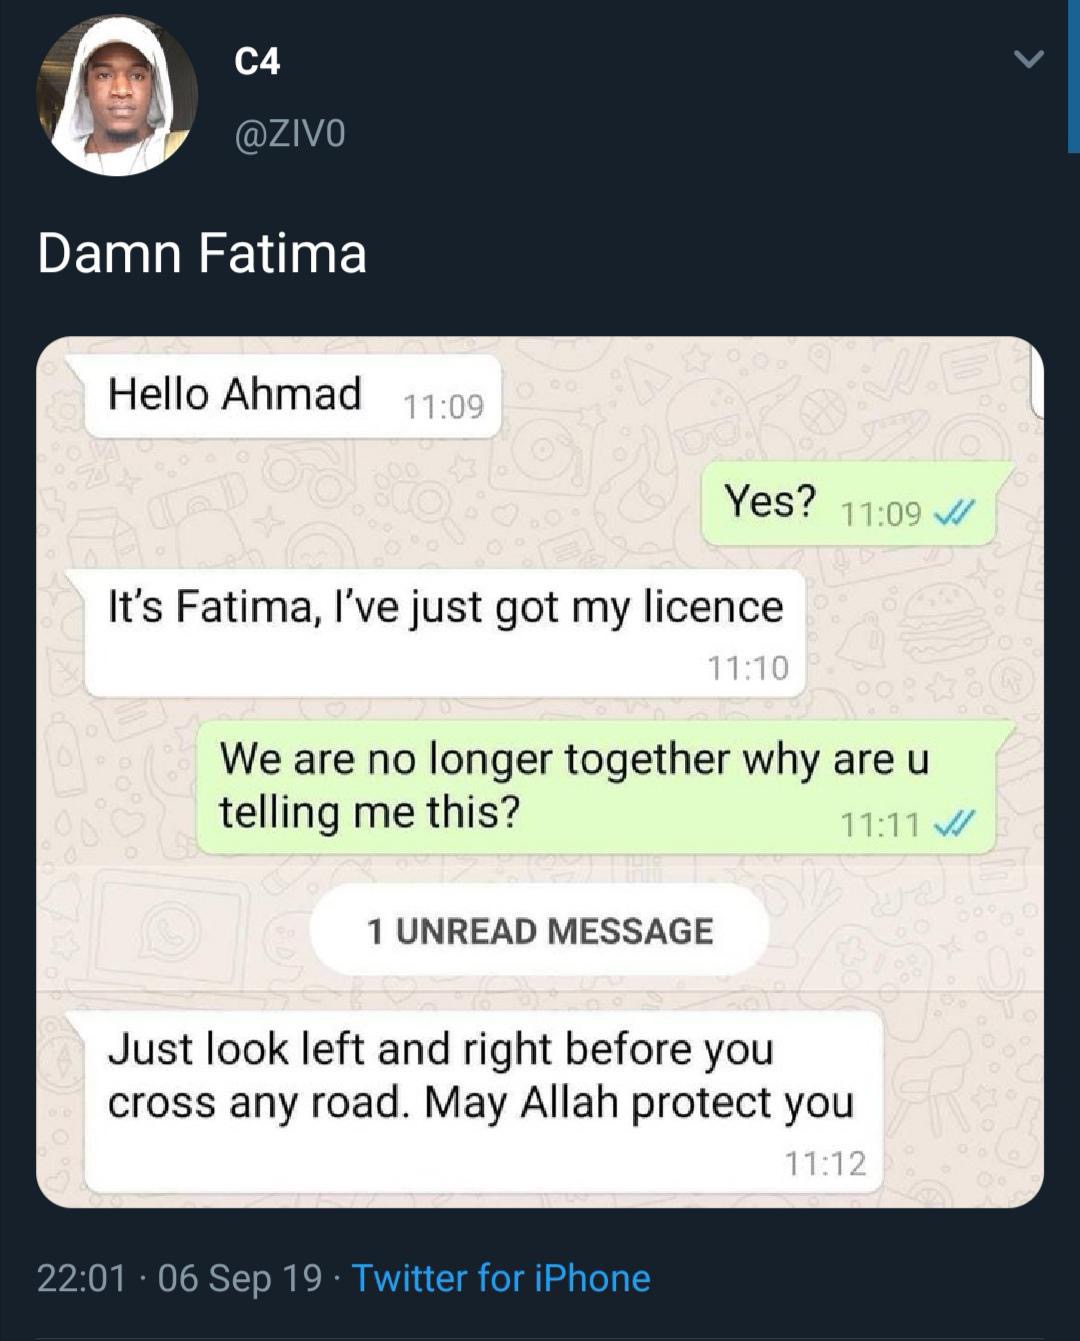 screenshot - C4 Damn Fatima Hello Ahmad Yes? It's Fatima, l've just got my licence We are no longer together why are u telling me this? V 1 Unread Message Just look left and right before you cross any road. May Allah protect you 06 Sep 19. Twitter for iPh